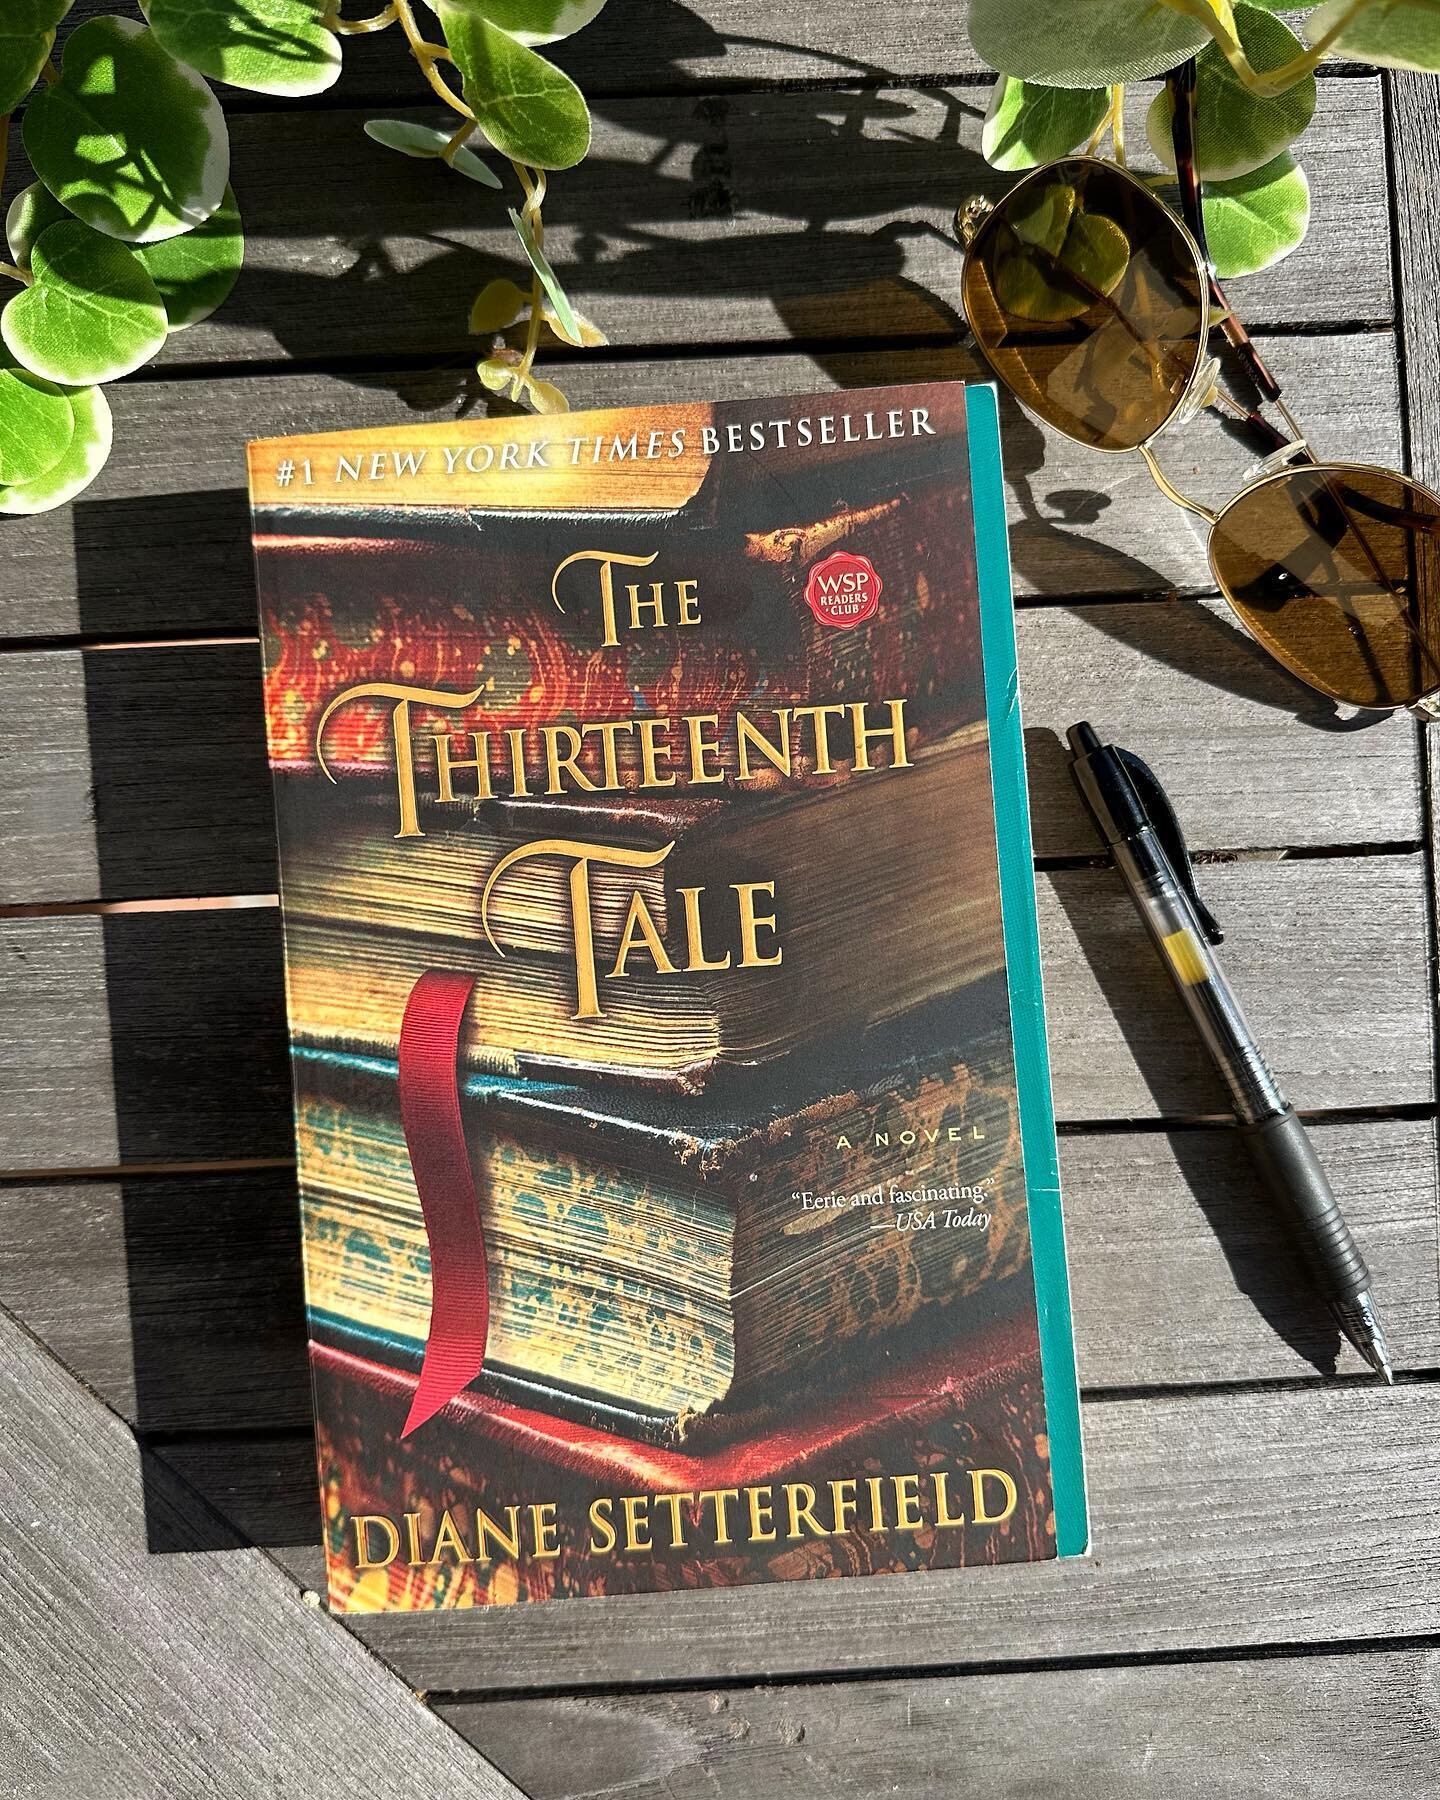 The Thirteenth Tale by Diane Setterfield &mdash; this gothic mystery is for people who love books. I have chills trying to tell you about this book, because it&rsquo;s haunting and exquisite and beautiful. Again, this book is for people who love book